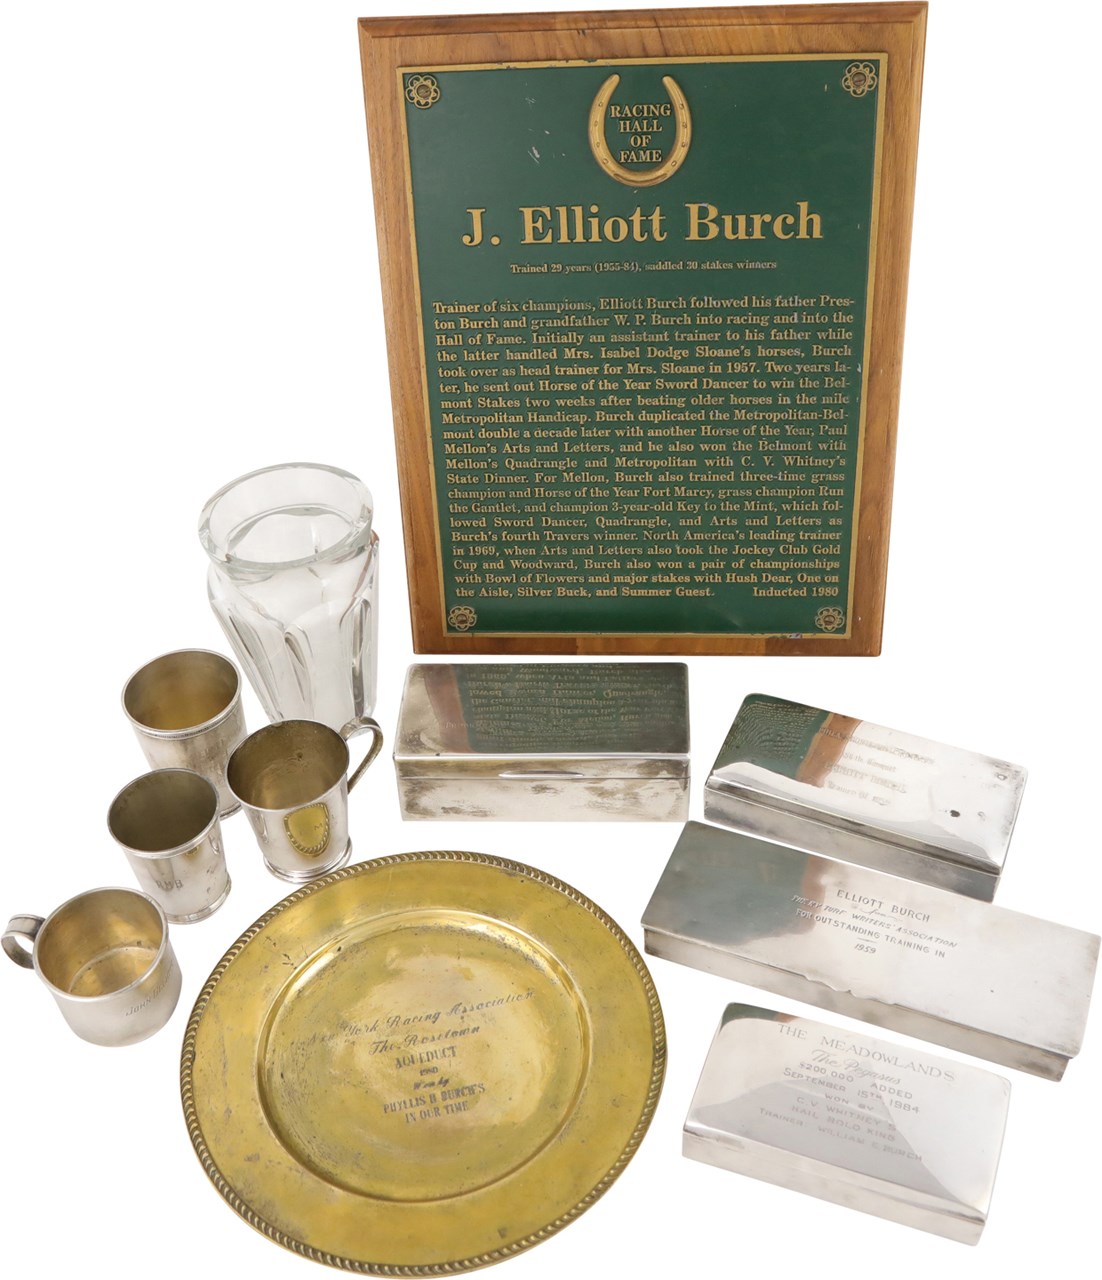 Horse Racing - Hall of Fame Trainer J. Elliott Burch Collection w/Sterling Silver, Baccarat Crystal & Hall of Fame Plaque (11)